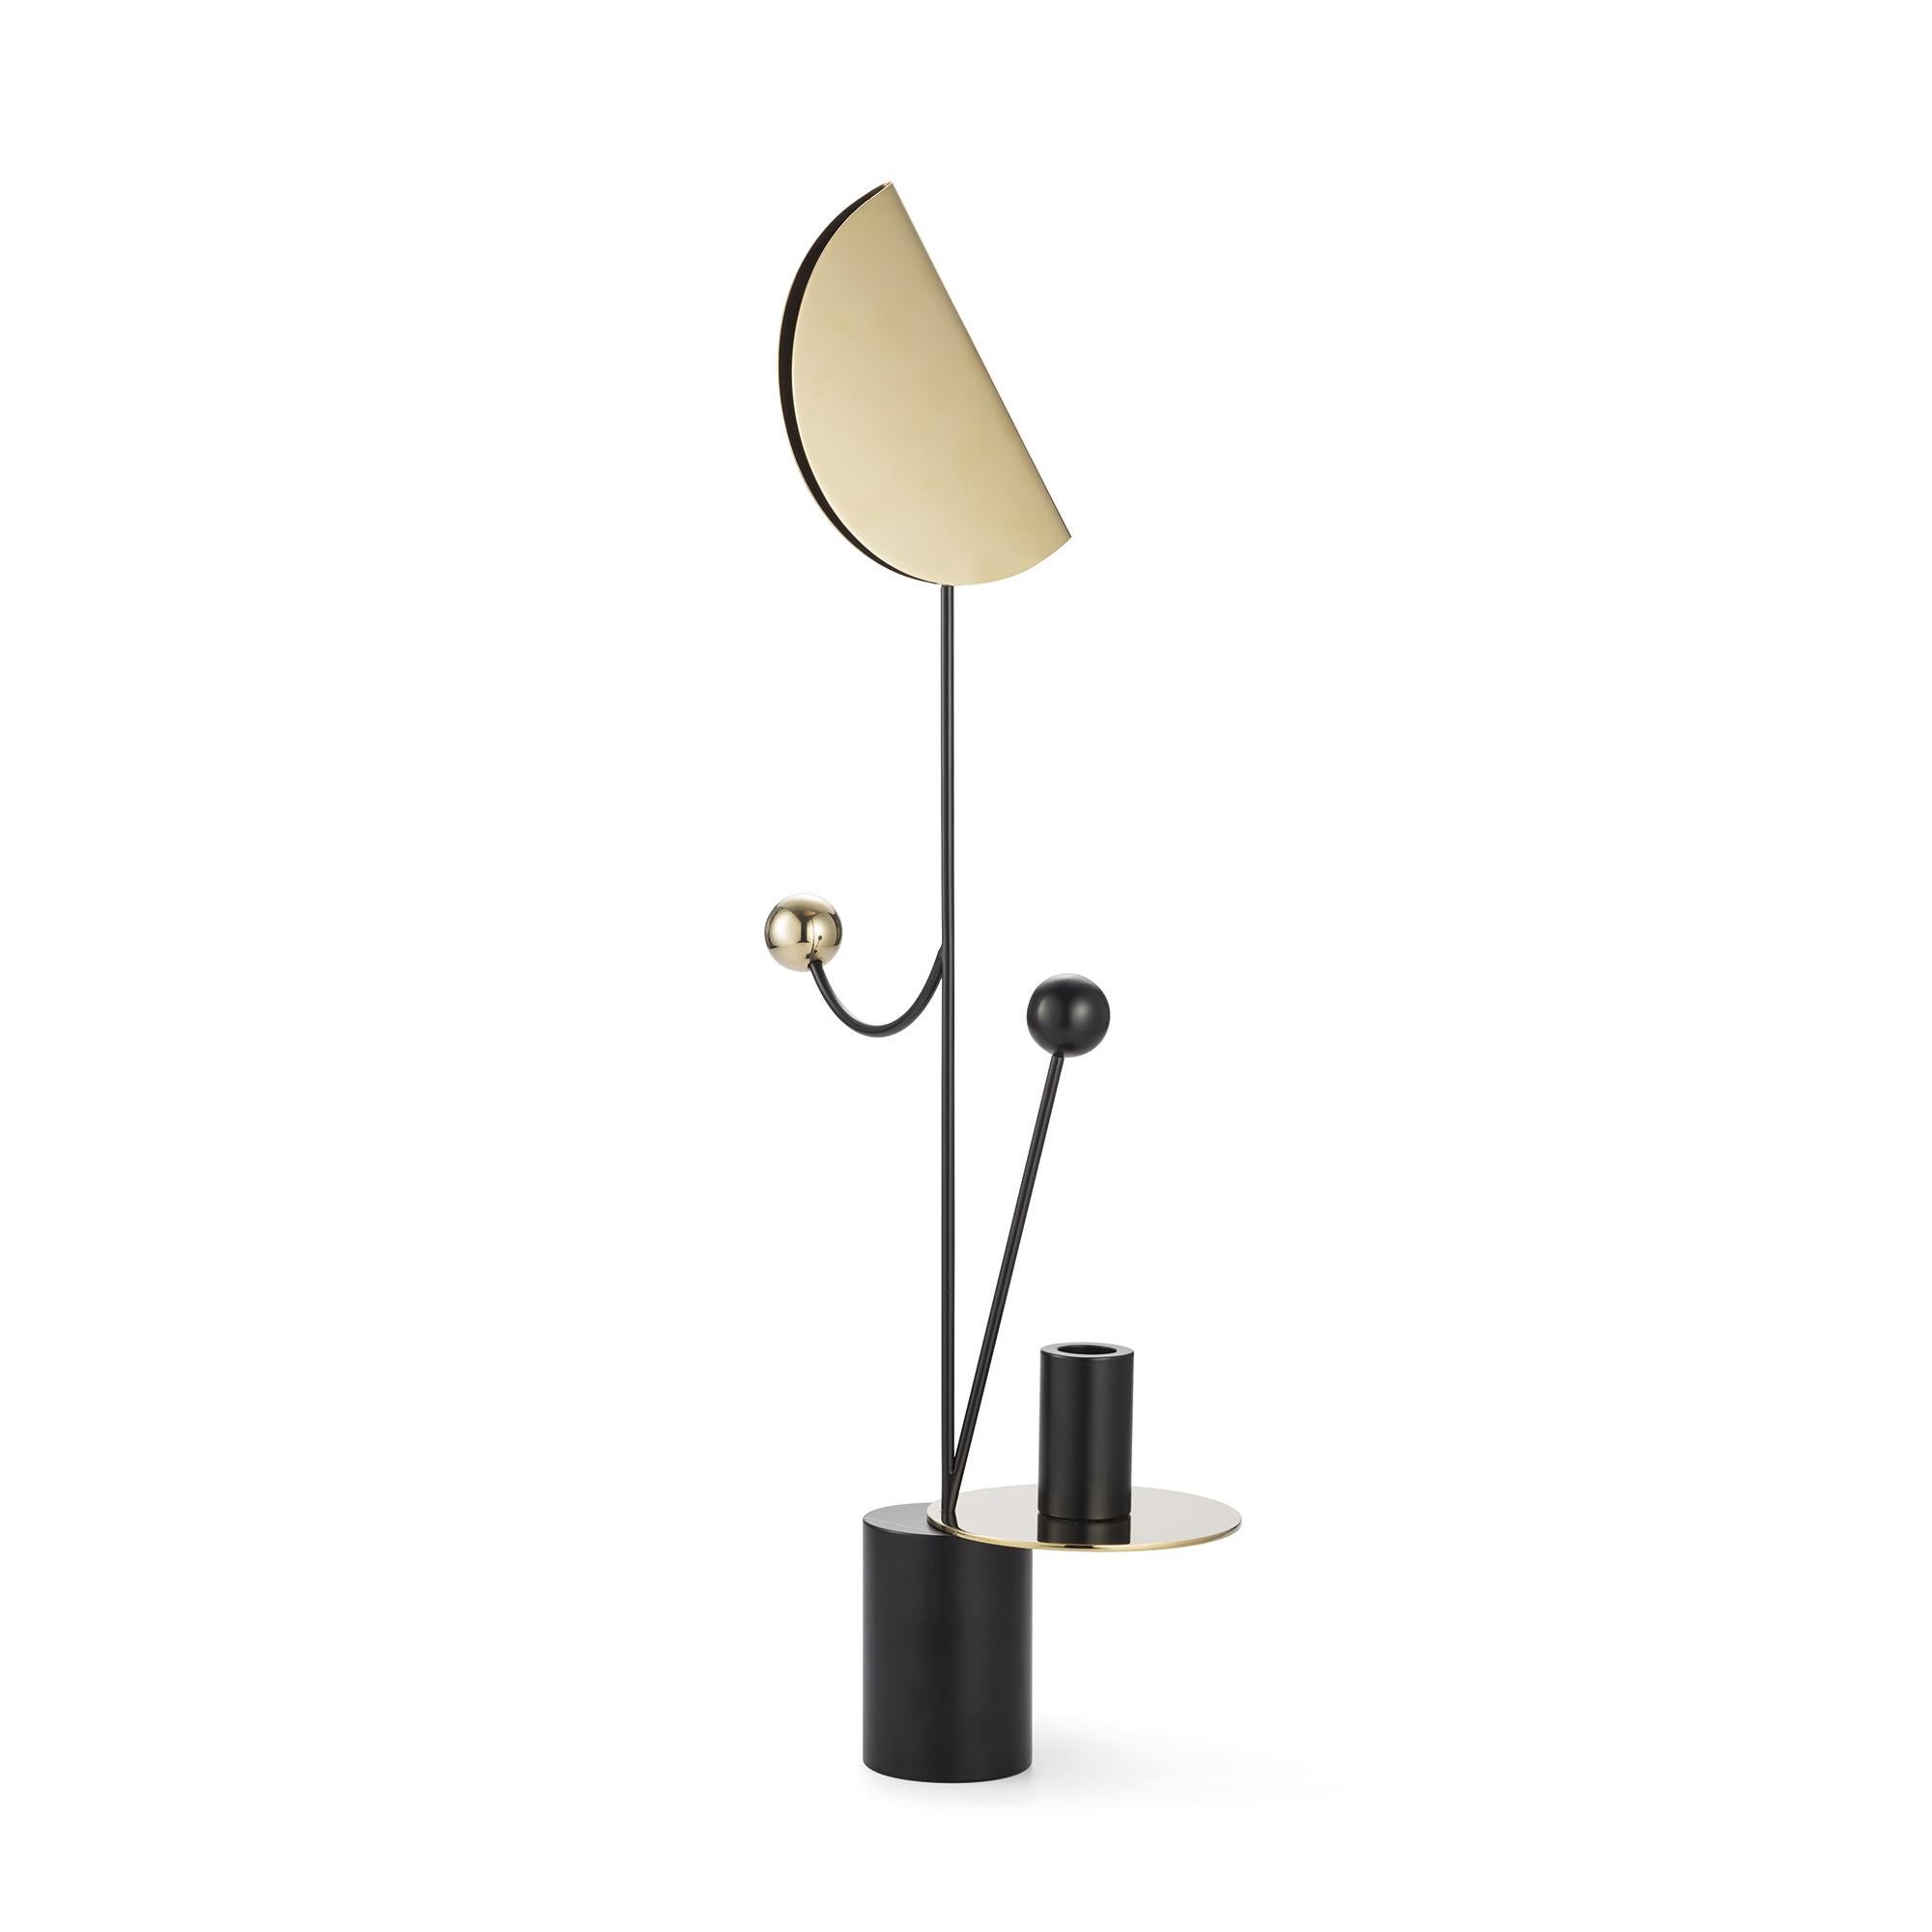 Les Immobiles N°2 candleholder by Thomas Dariel
Dimensions: D 15.5 x W 19.5 x H 60 cm 
Materials: base in black powder-coated metal parts in plated metal coated with glossy copper finish color: Multicolored. 
Also available in other